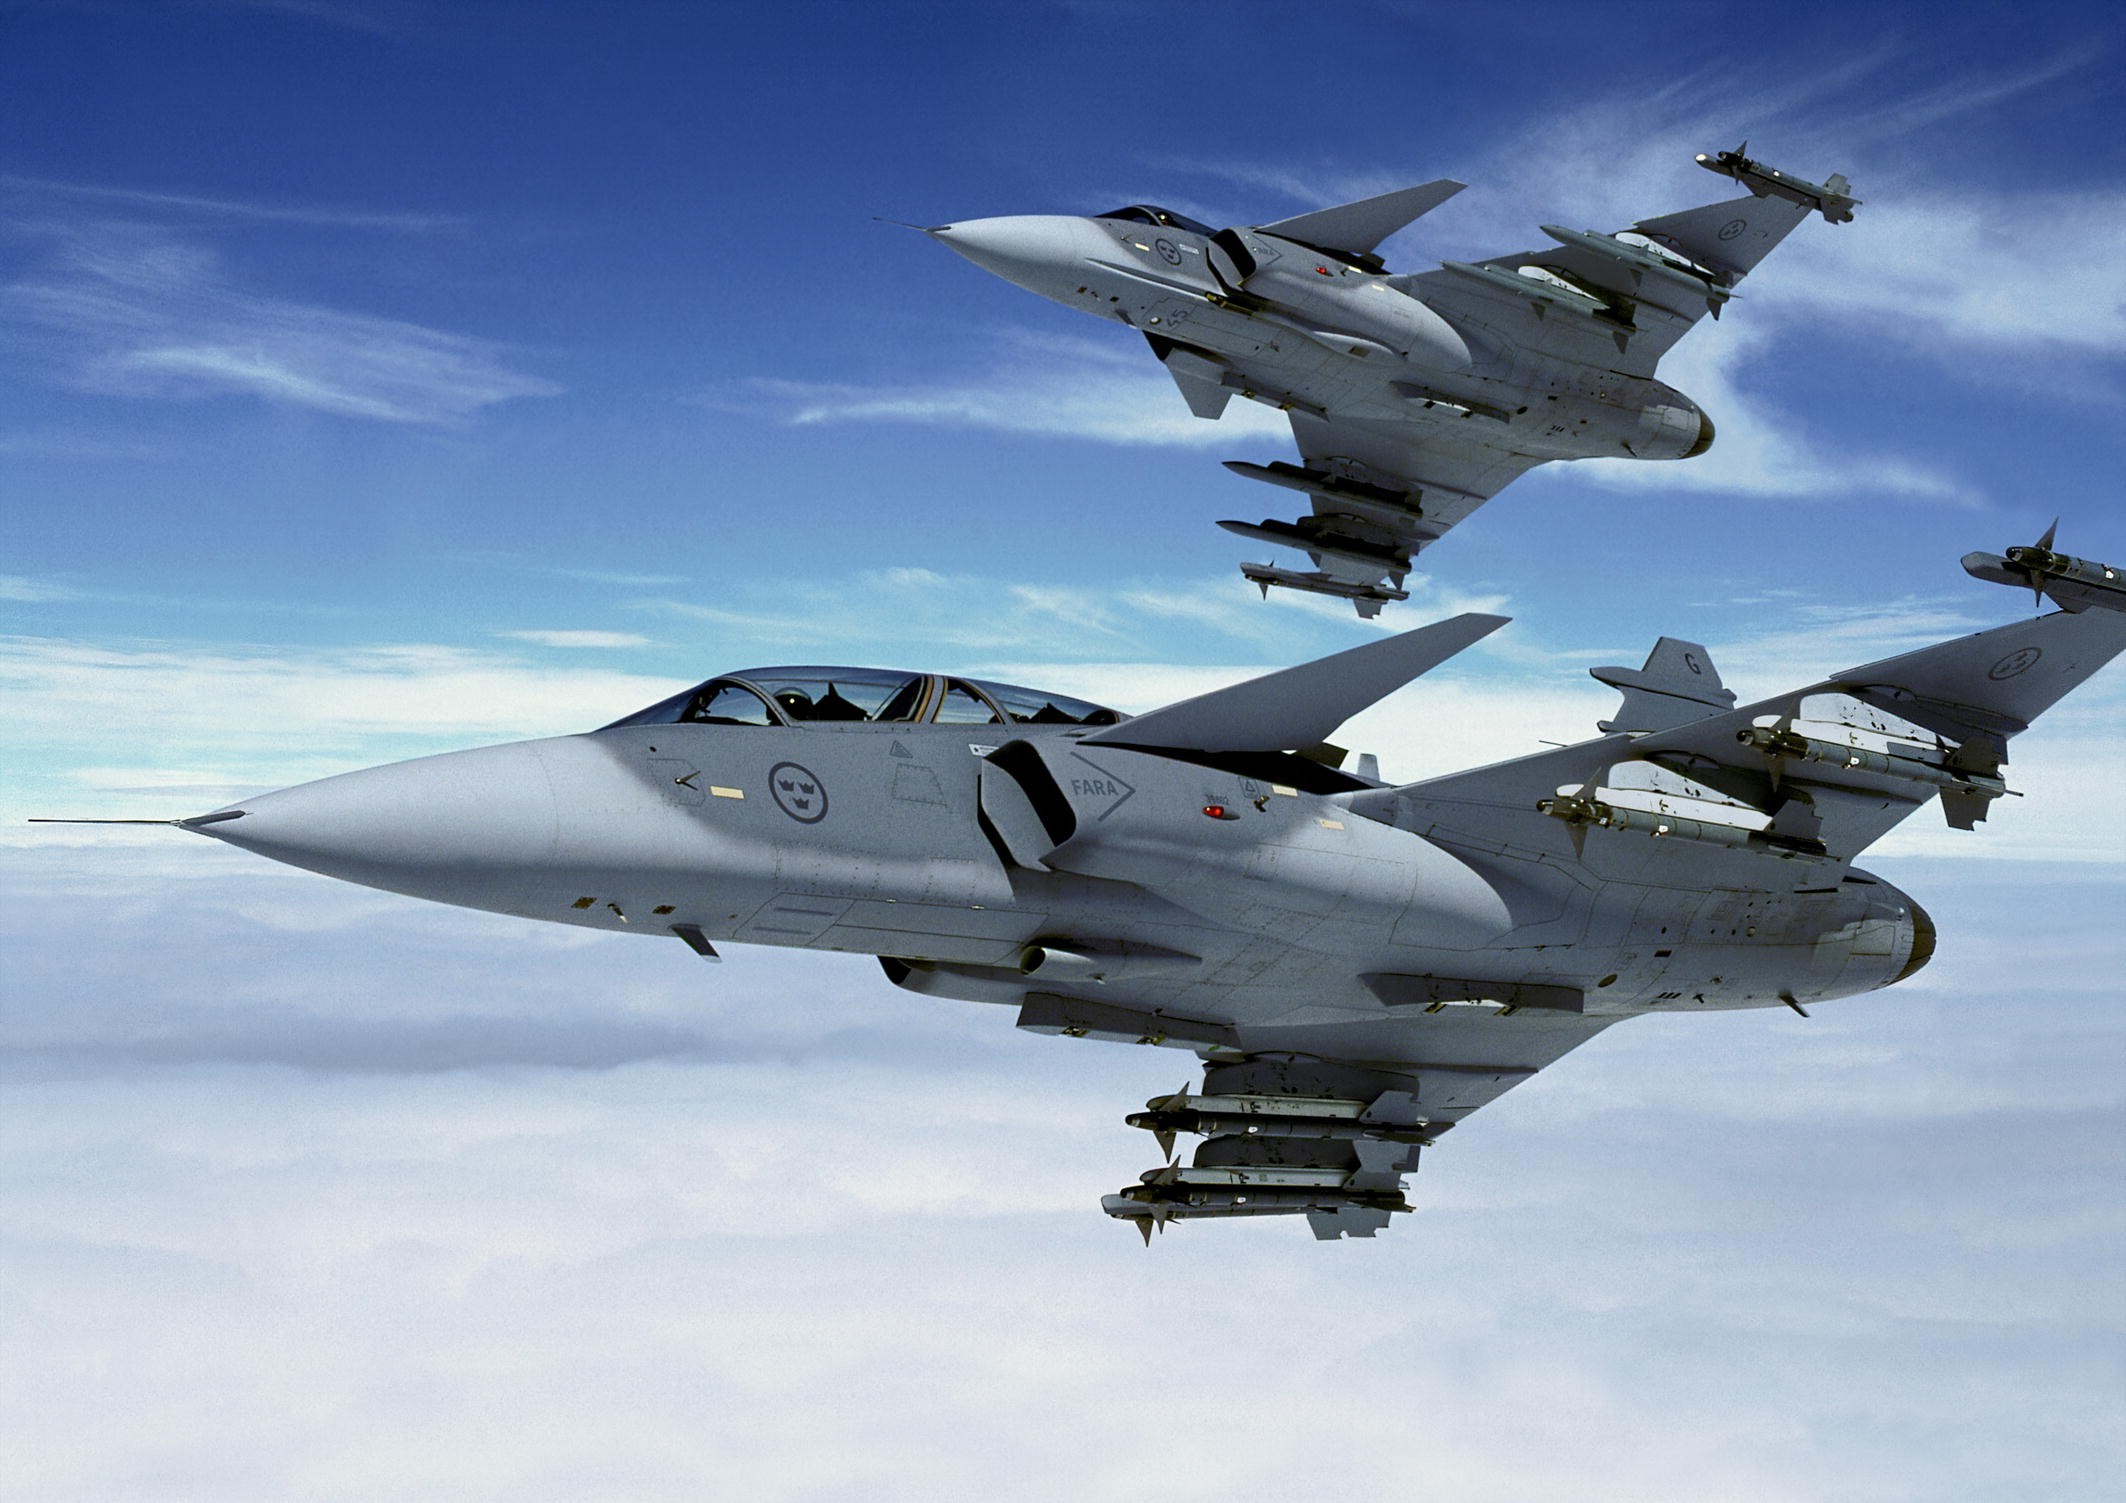 JAS 39 Gripen Airplane Aircraft Sky Military Aircraft Vehicle Military 2126x1503